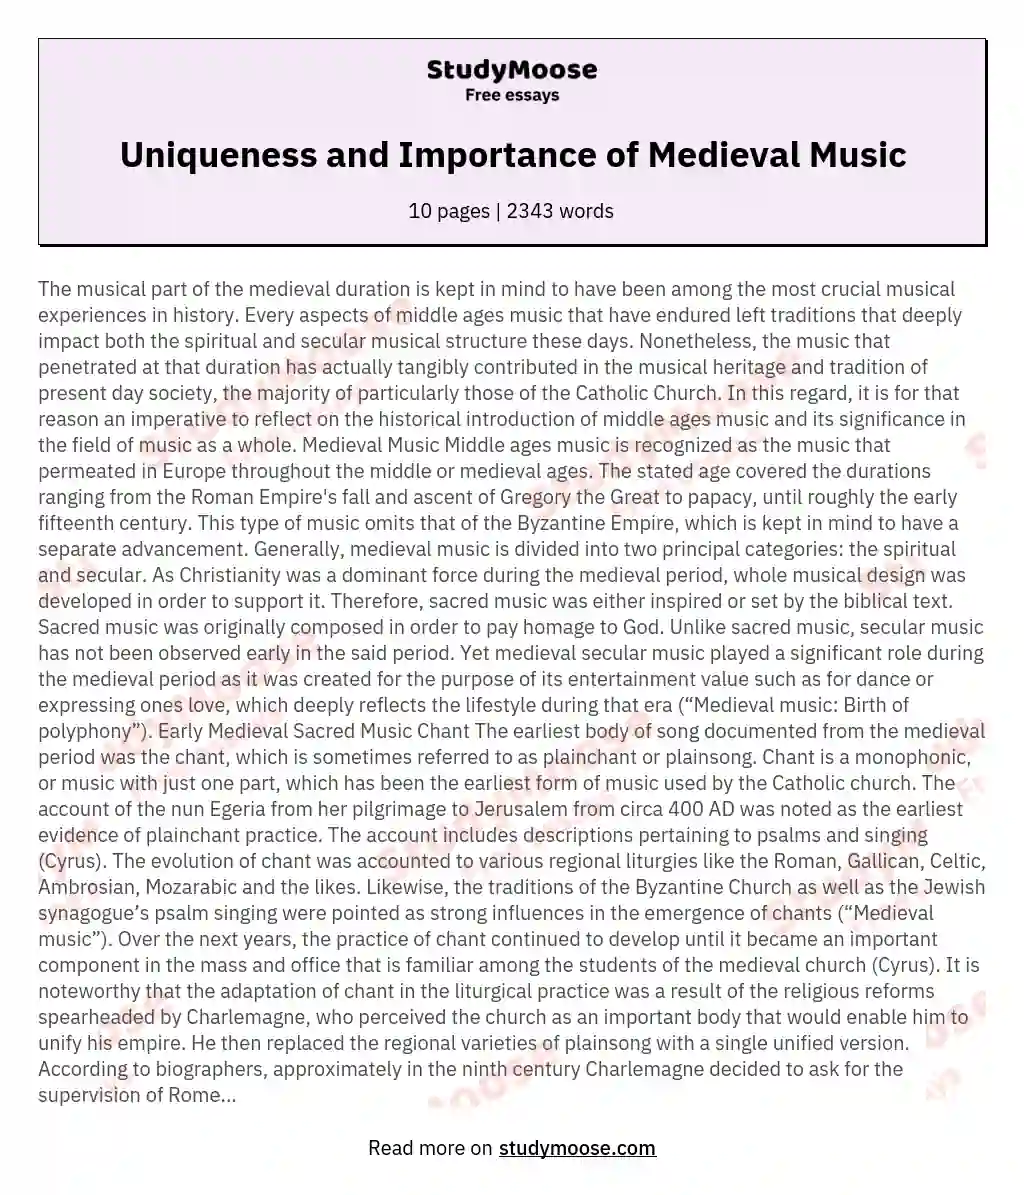 Uniqueness and Importance of Medieval Music essay